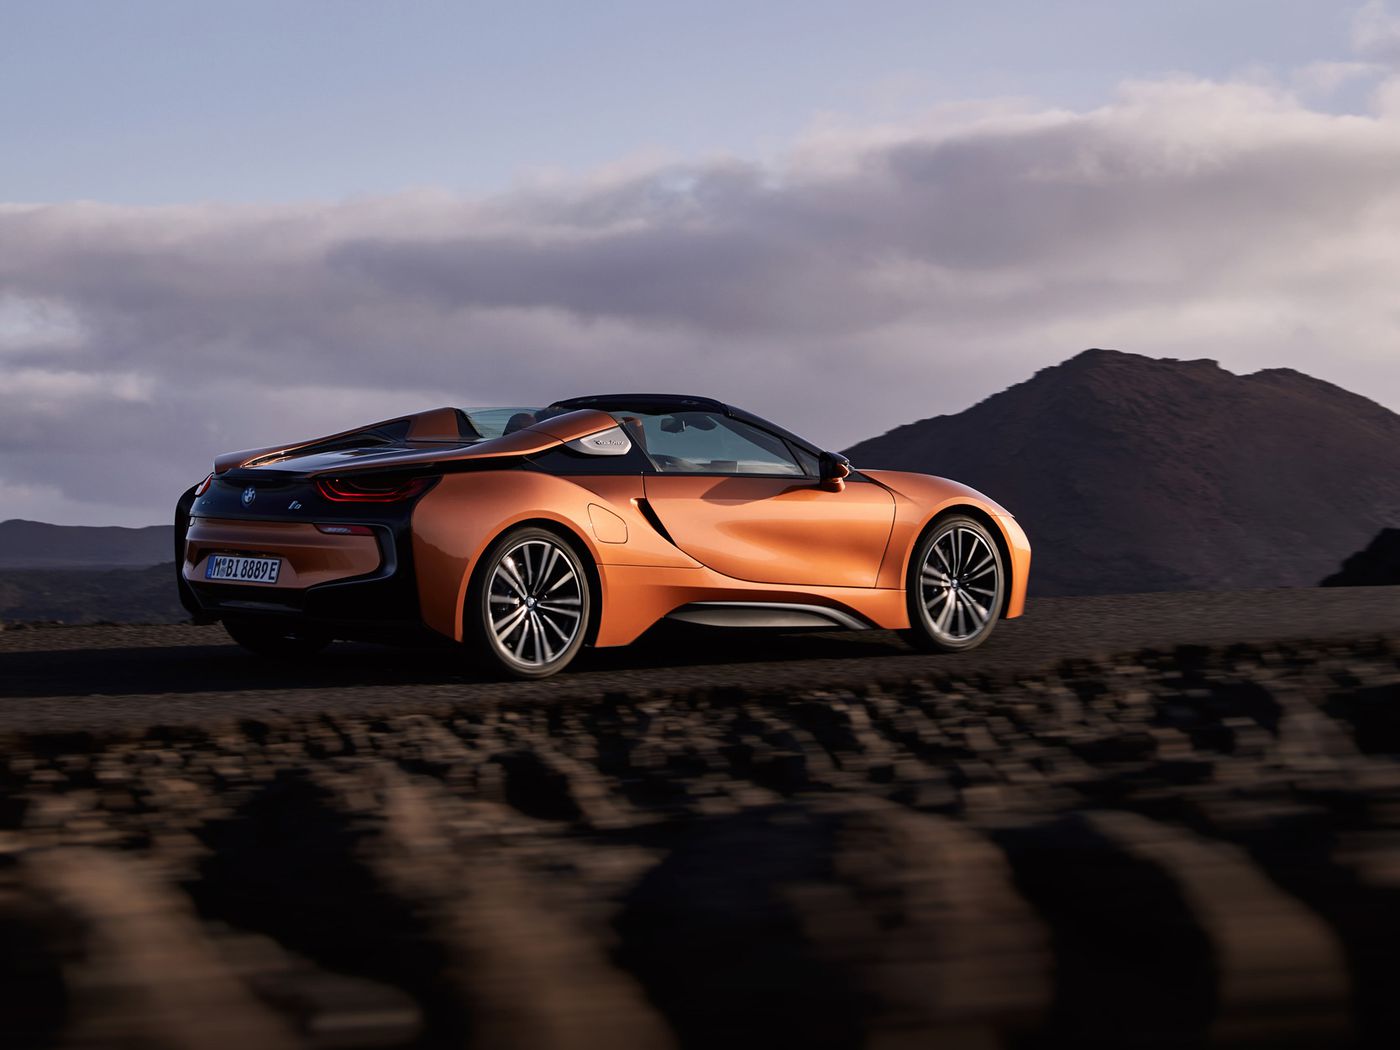 The Futuristic Bmw I8 Looks Even Better As A Convertible - The Verge